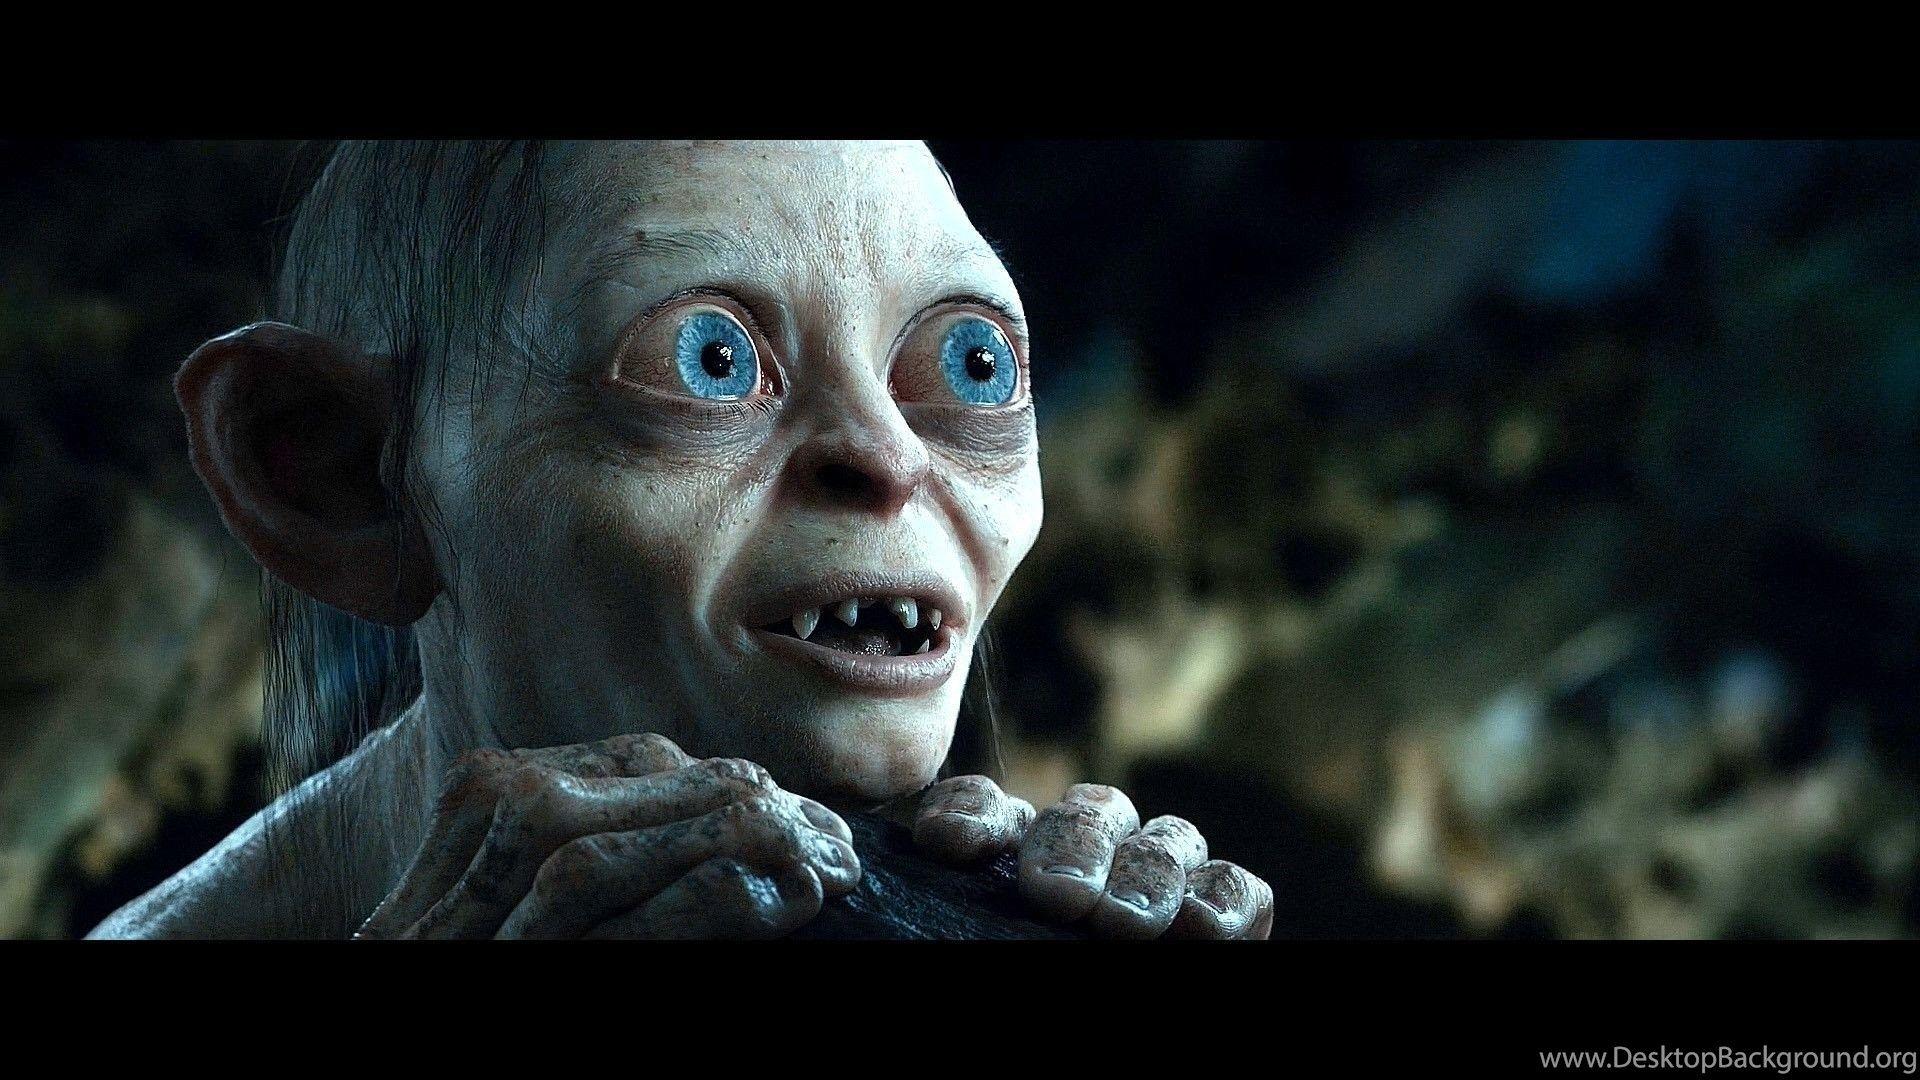 Gollum Sings Again: Sméagol Performs A Haunting Rendition Of Mad